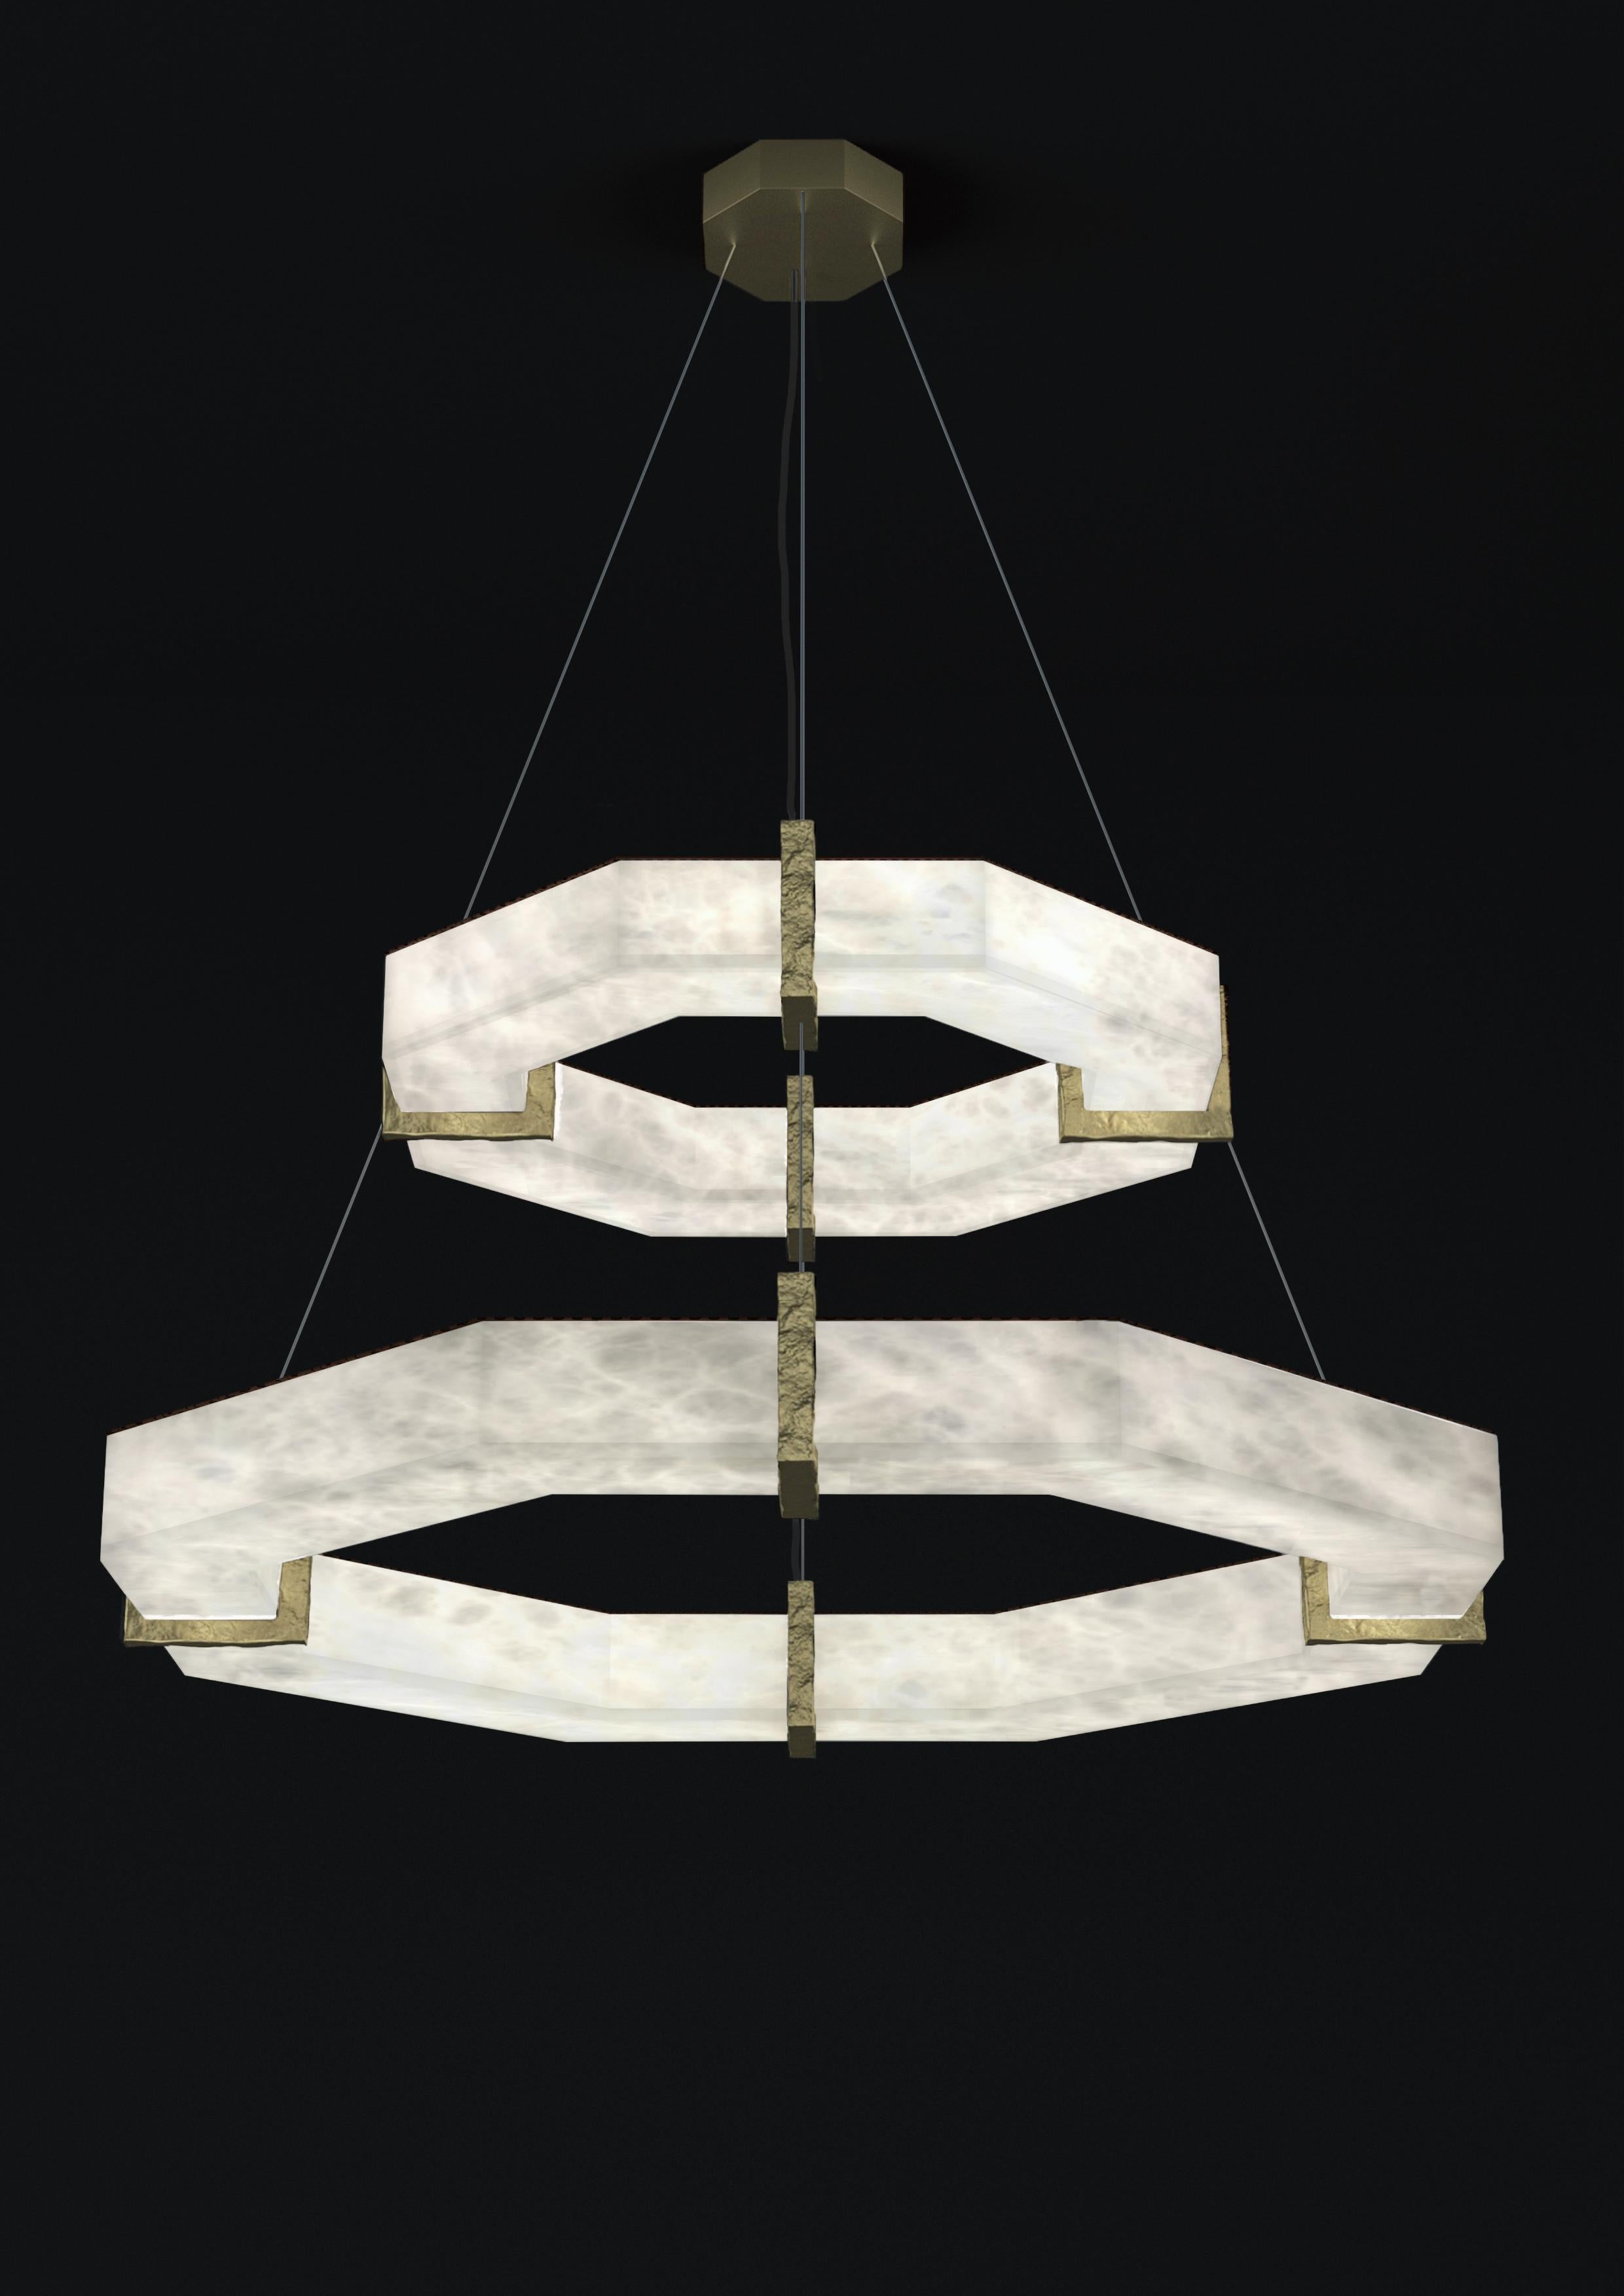 Efesto Brushed Brass Double Pendant Lamp by Alabastro Italiano
Dimensions: D 80.5 x W 80.5 x H 36.5 cm.
Materials: White alabaster and brass.

Available in different finishes: Shiny Silver, Bronze, Brushed Brass, Ruggine of Florence, Brushed